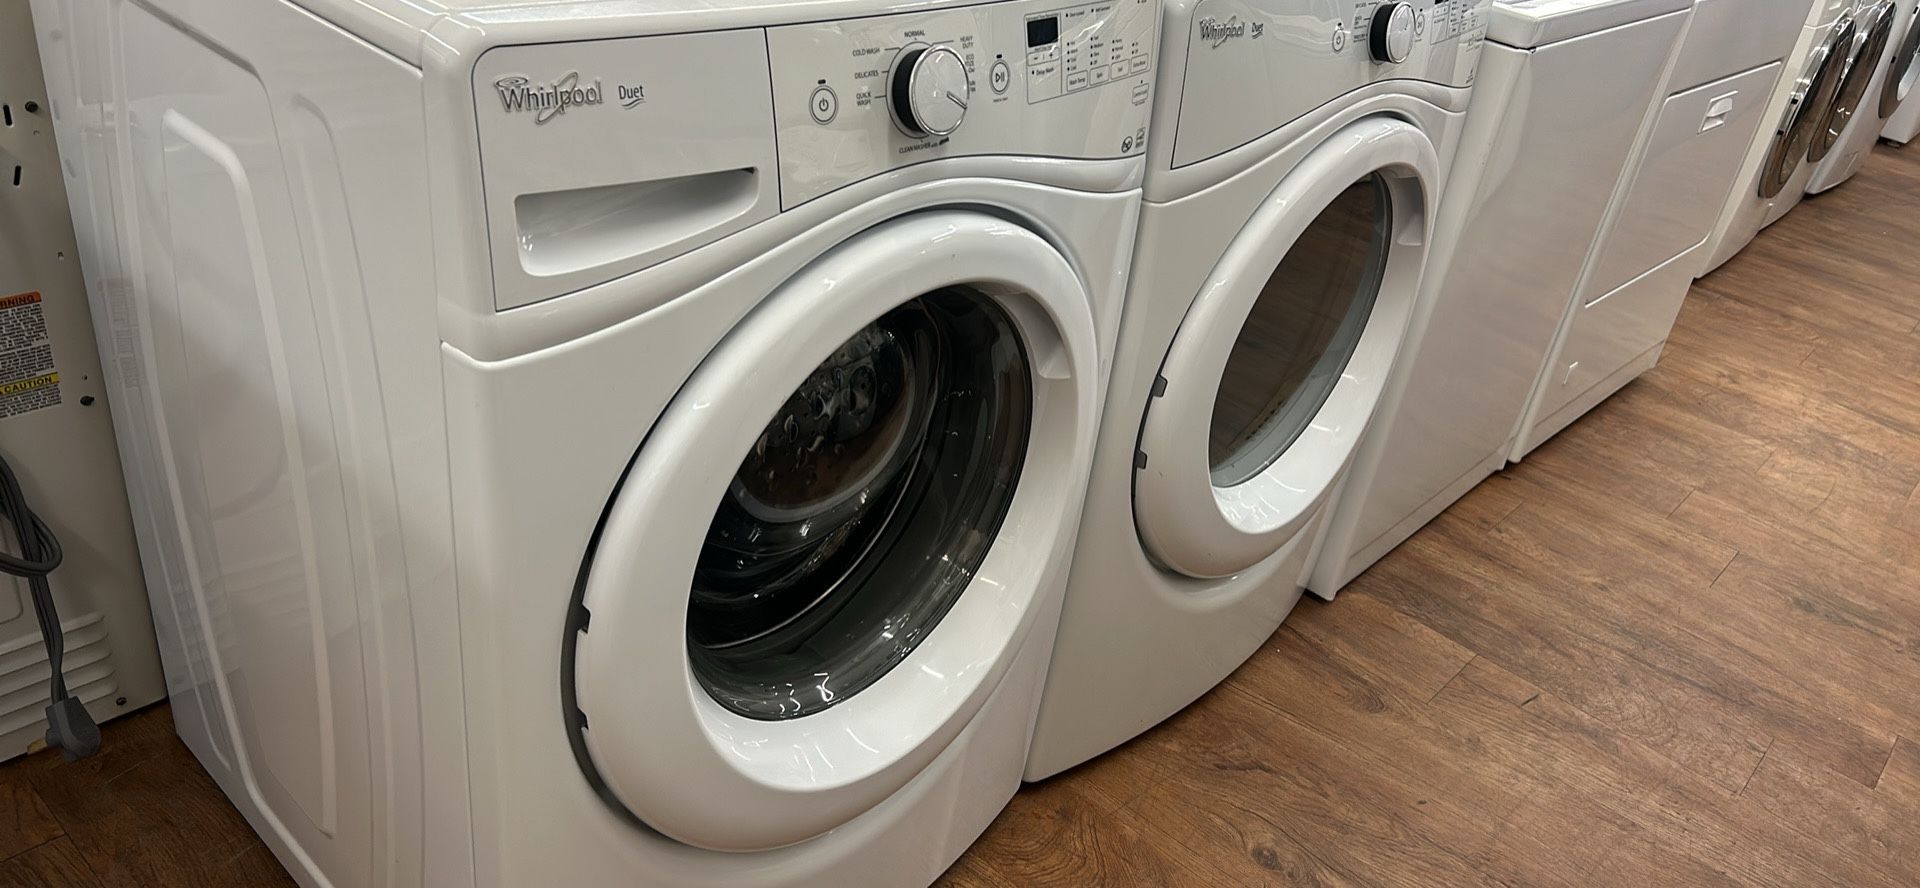 Whirlpool Washer And Electric Dryer For Sale!! 